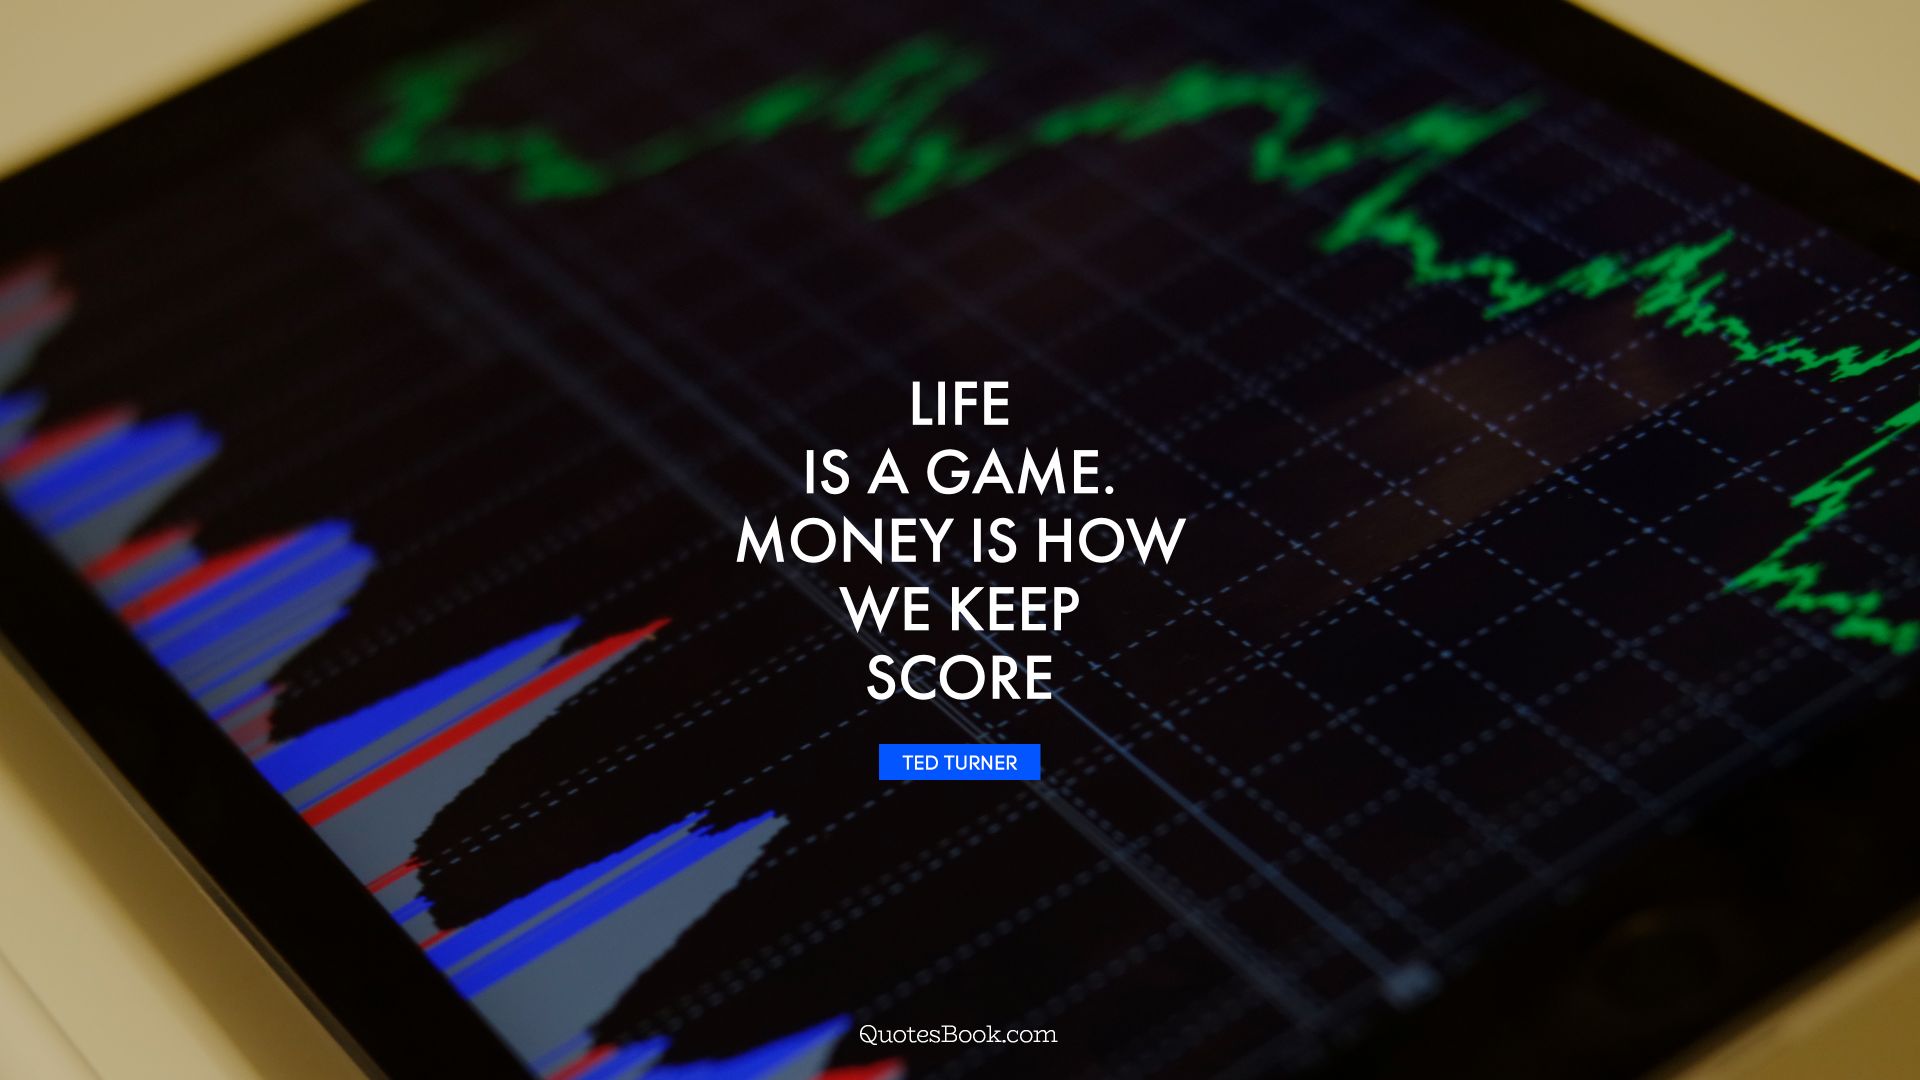 Life is a game. Money is how we keep score. - Quote by Ted Turner